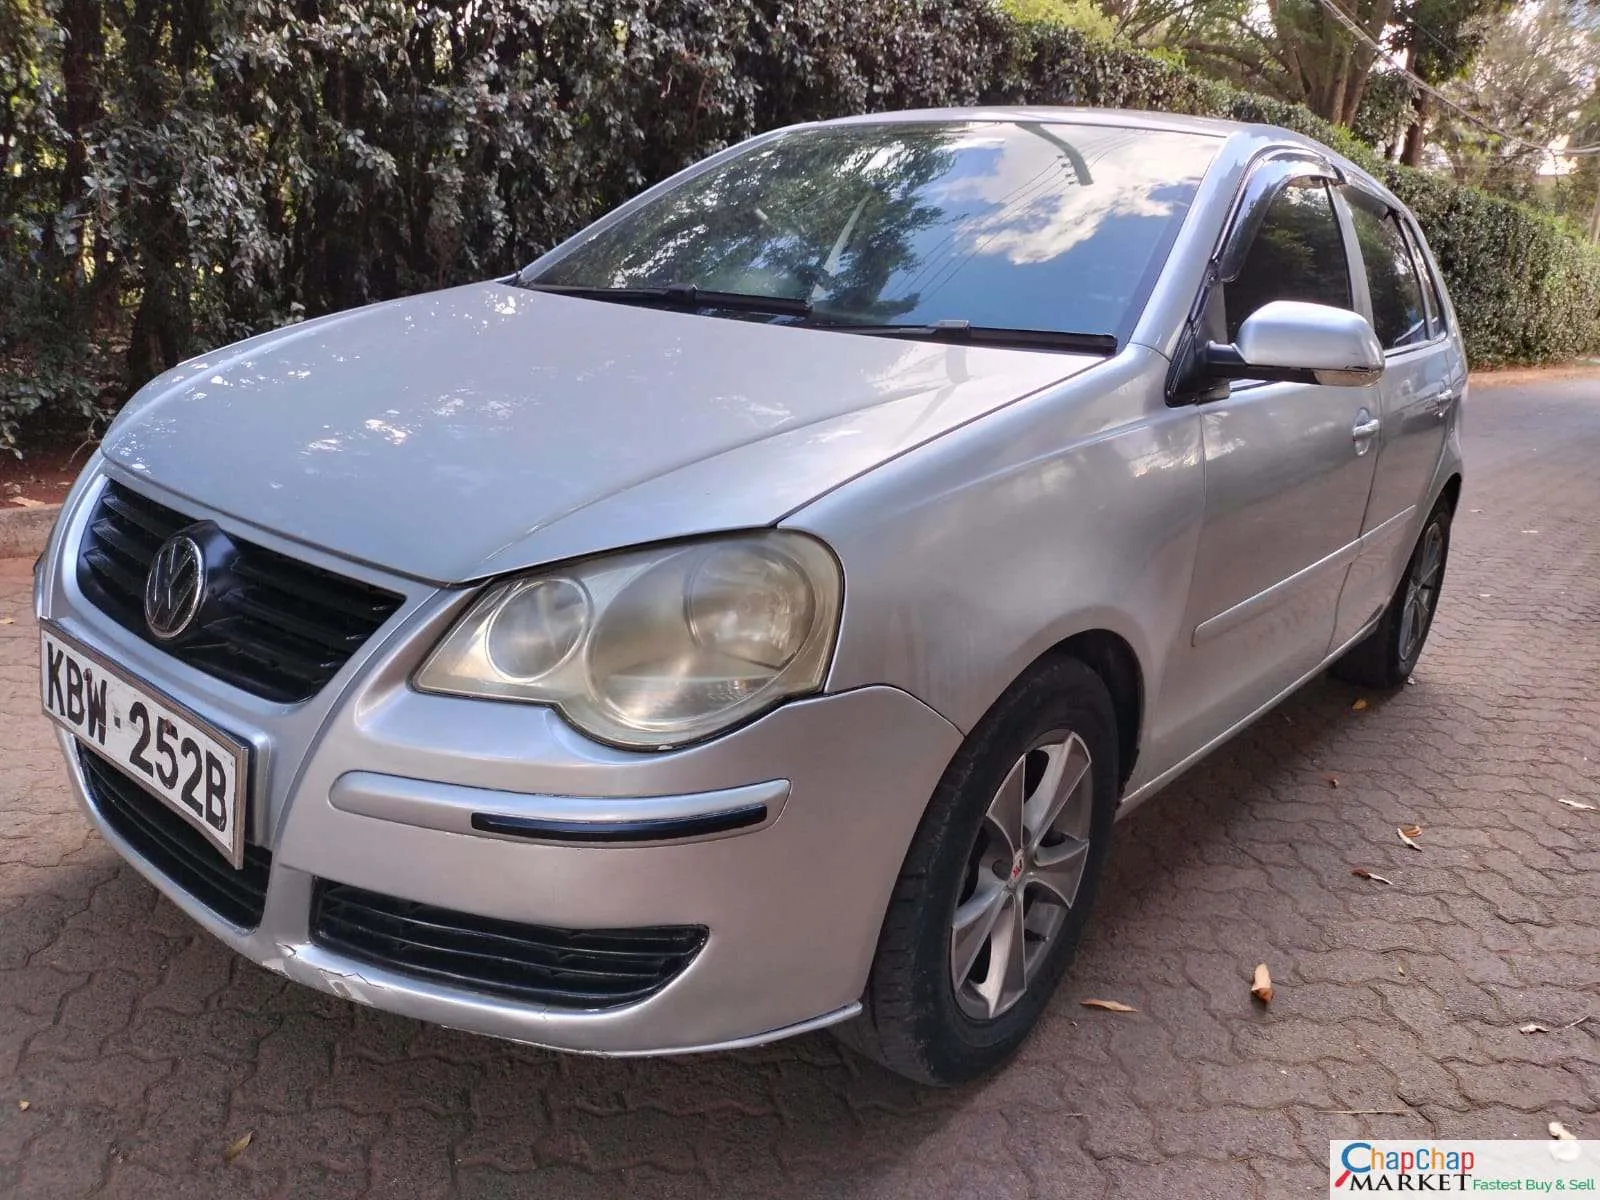 Volkswagen polo for sale in kenya hire purchase installments You Pay 30% Deposit Trade in Ok Hot vw Polo Kenya